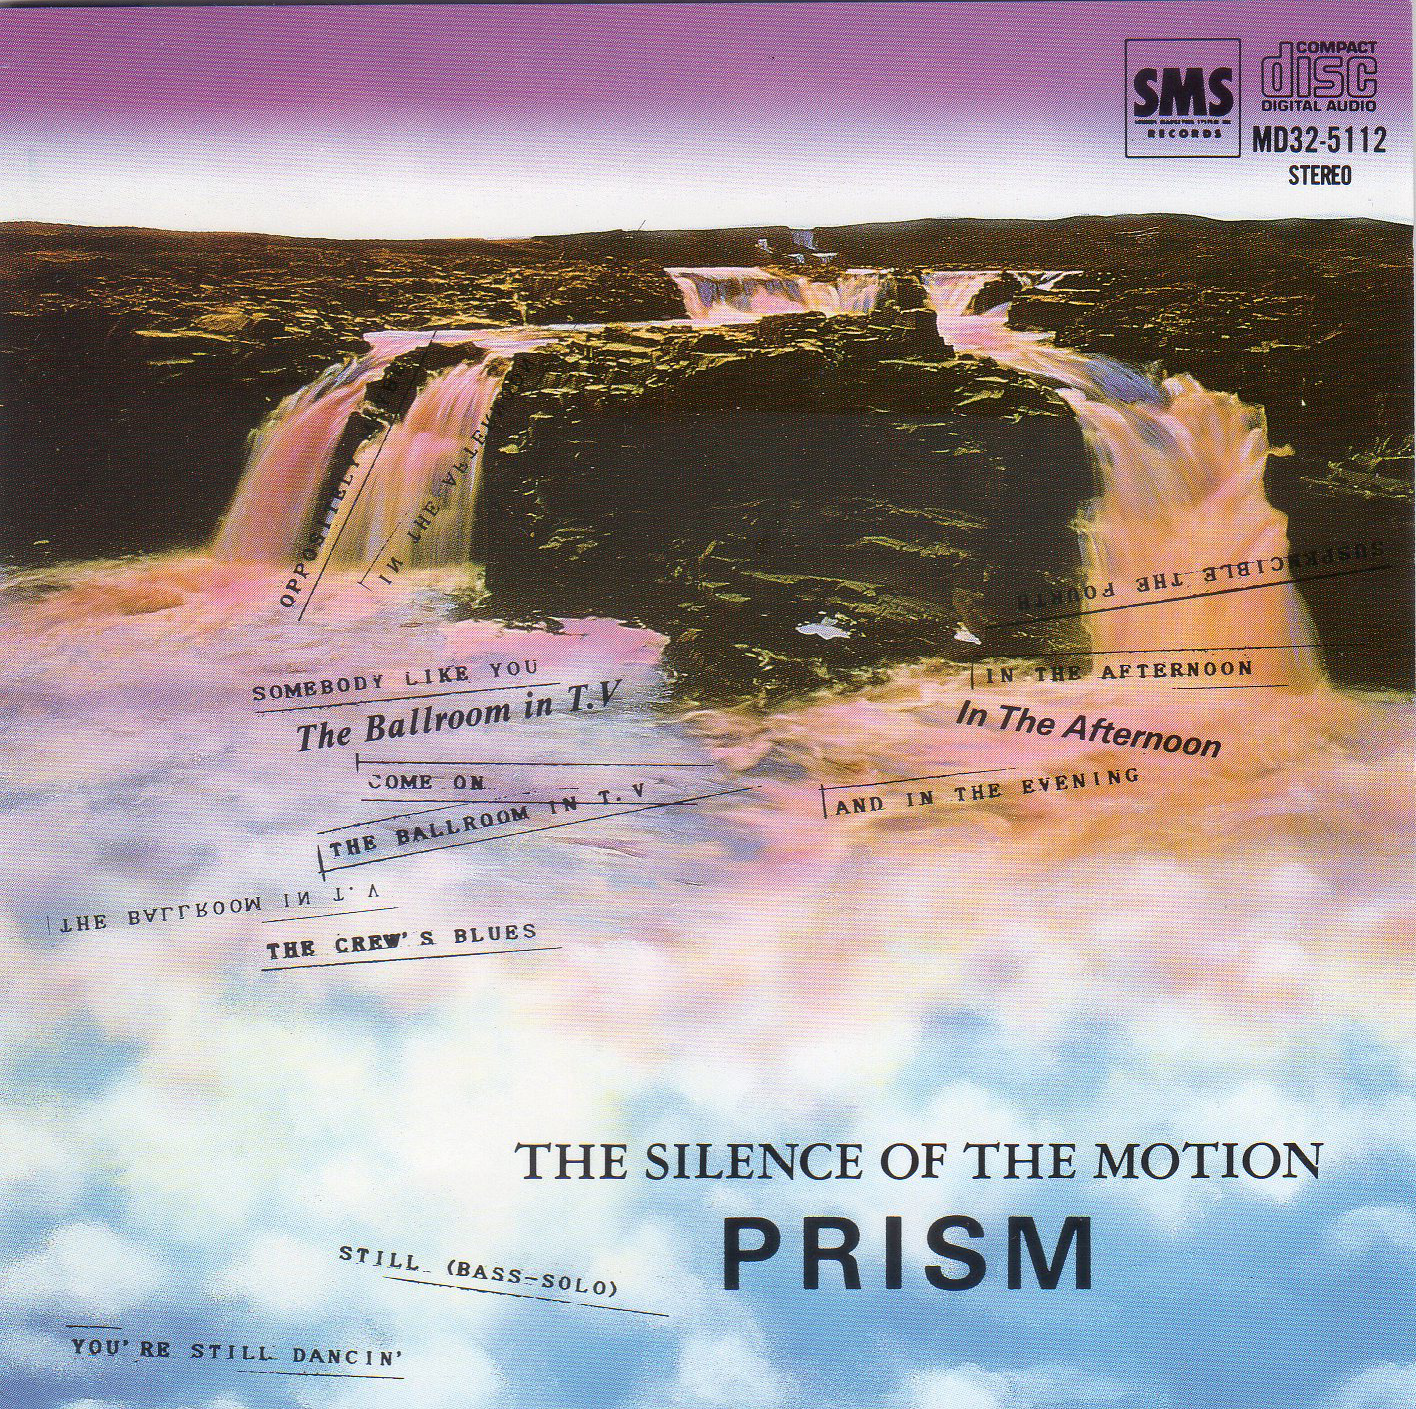 THE SILENCE OF THE MOTION